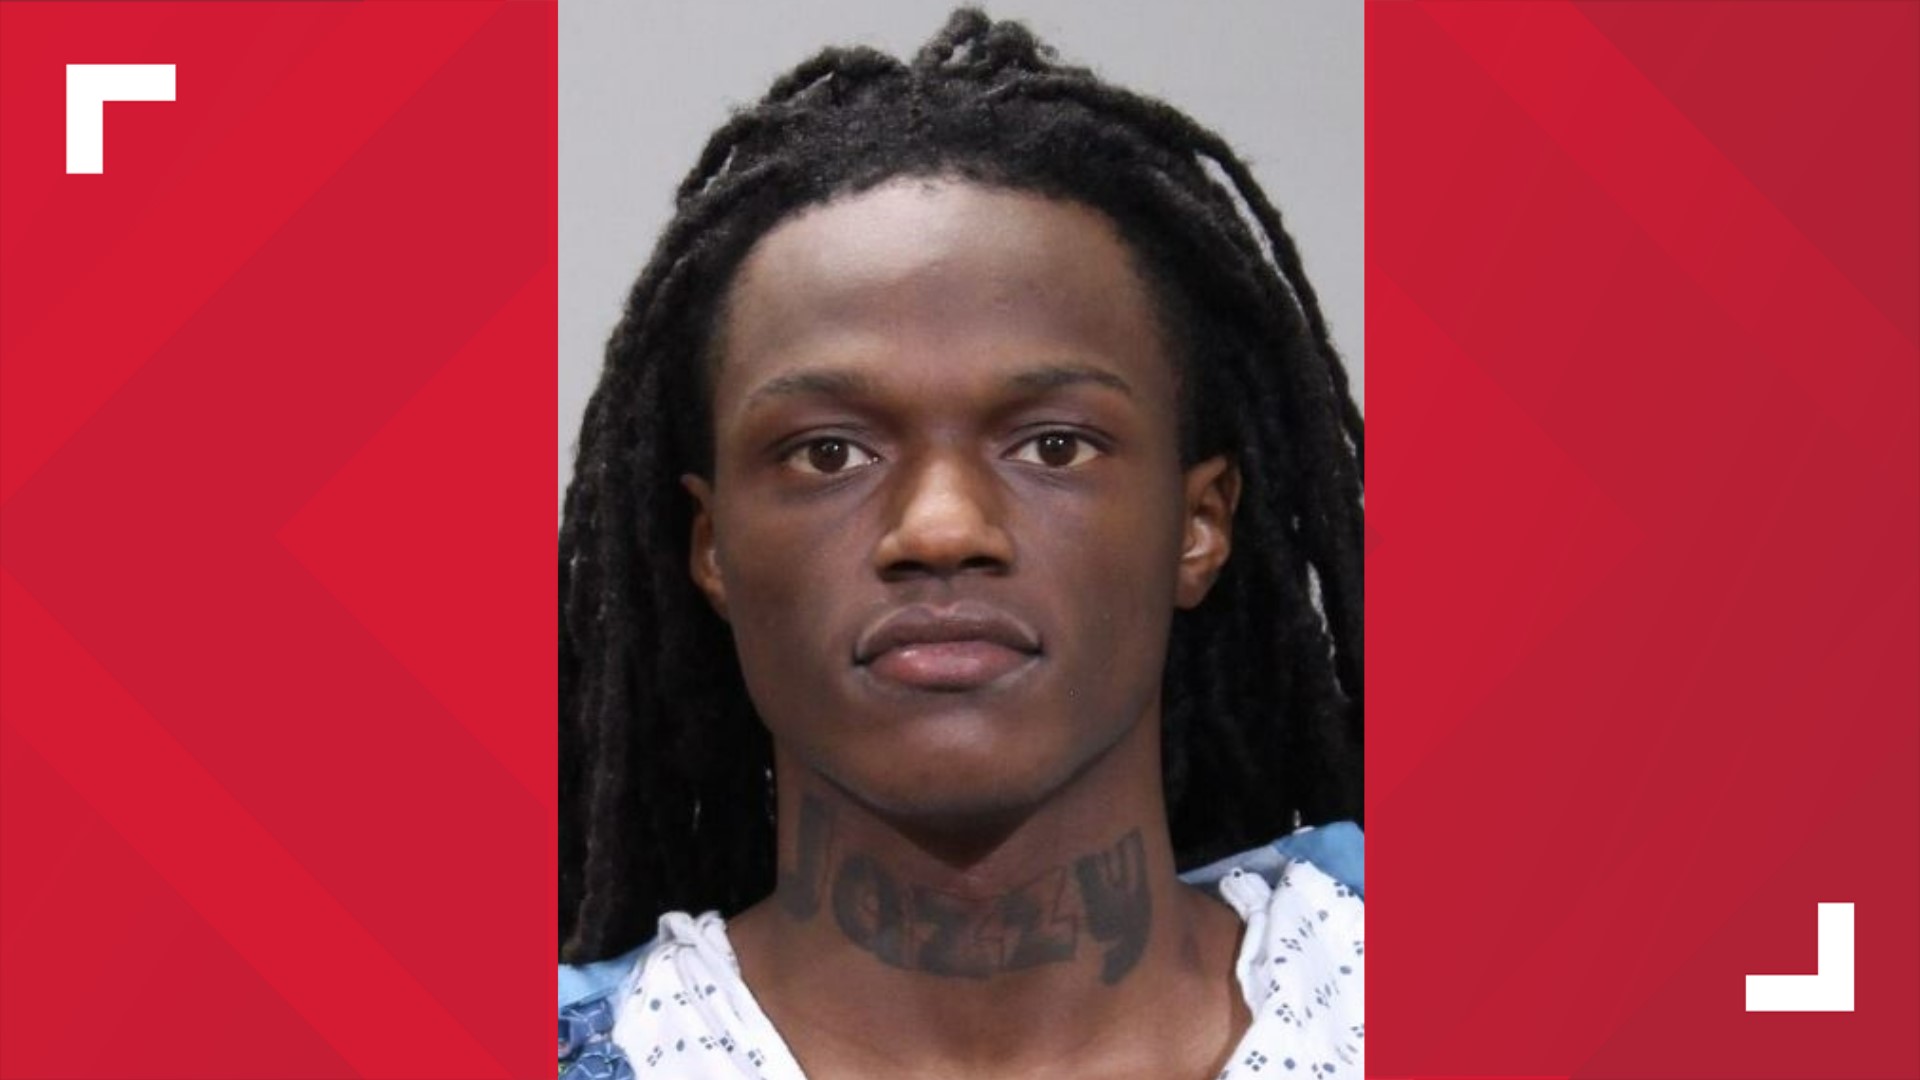 Cayon Drake is charged in connection to a shooting during a drug deal Tuesday night that left two people dead.